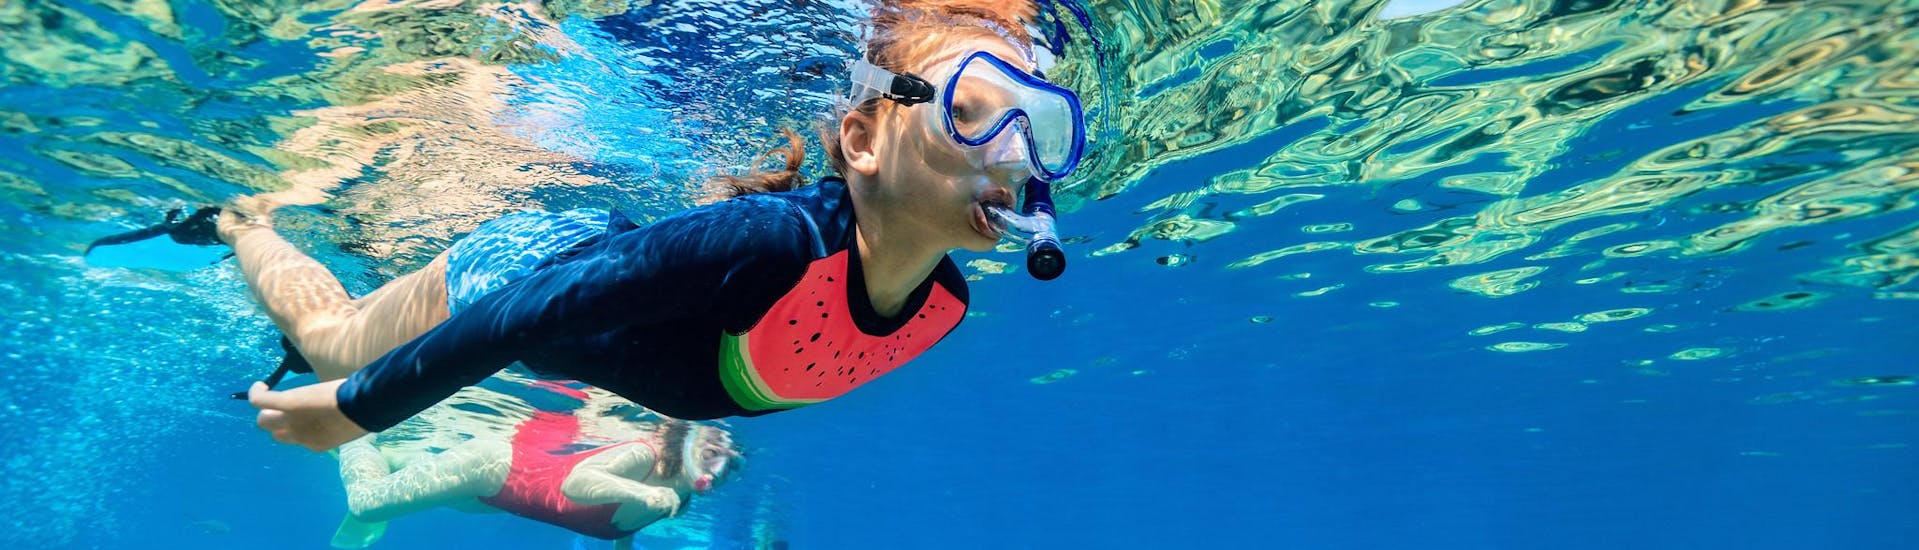 Kids enjoy snorkeling through their diving goggles during a boat trip